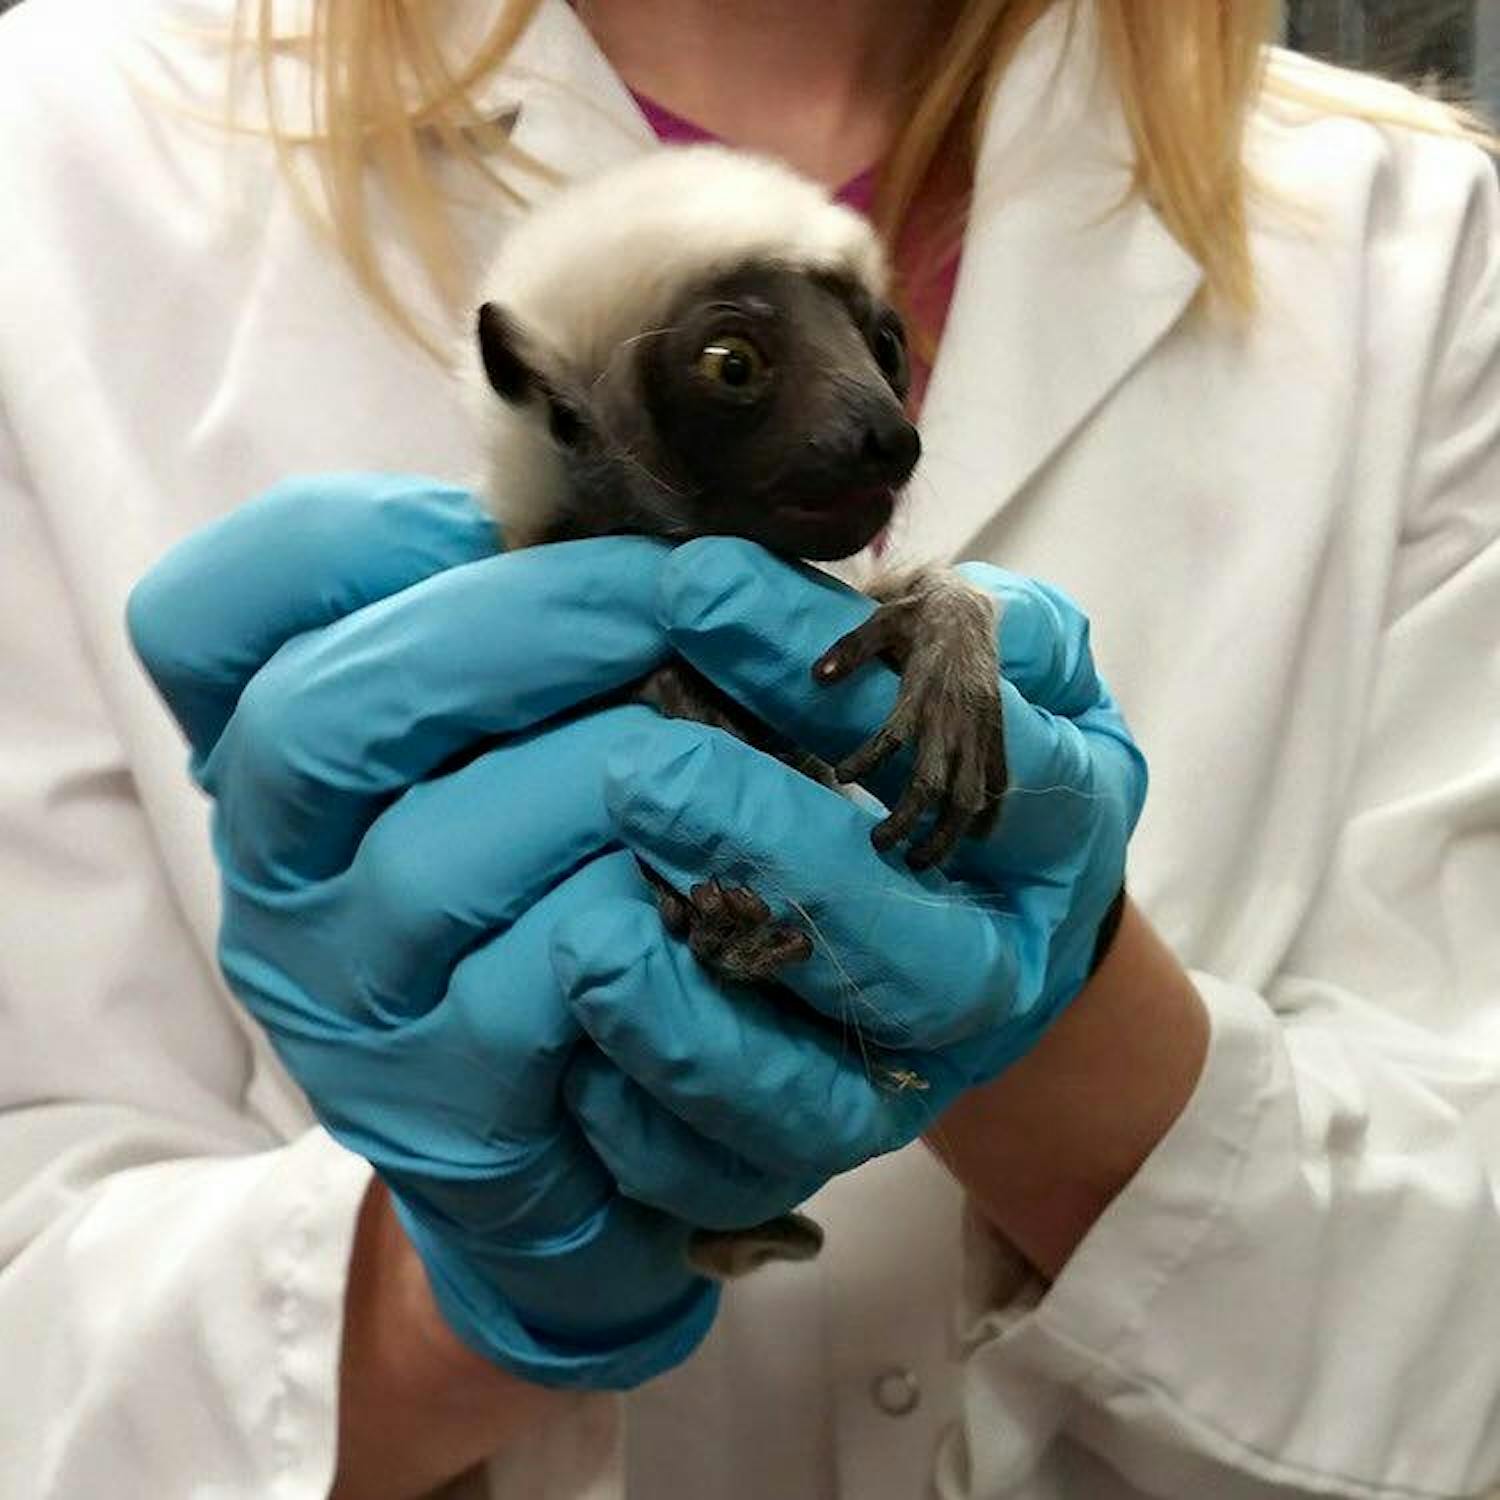 Lemur Center staffers worked during last weekend’s snowstorm to deliver a baby Saturday.